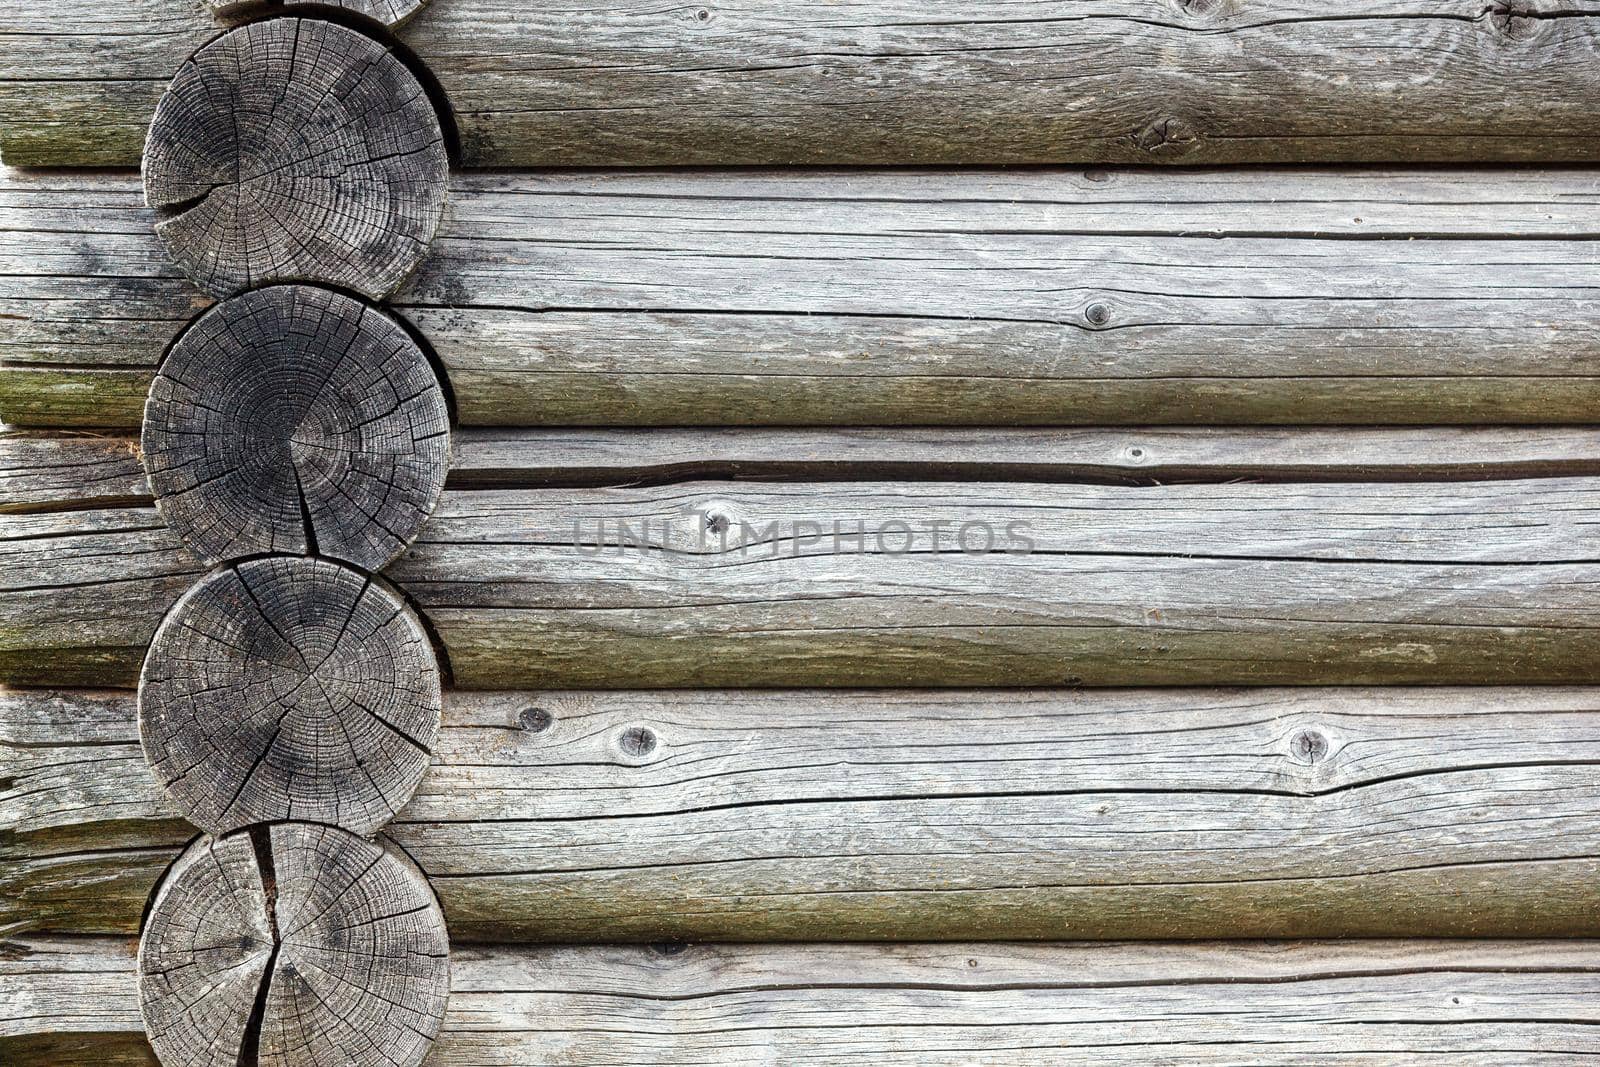 Old Rustic House Architectural Features Hut Built of Wood. Weathered Cracked Wooden Texture close-up by Lincikas